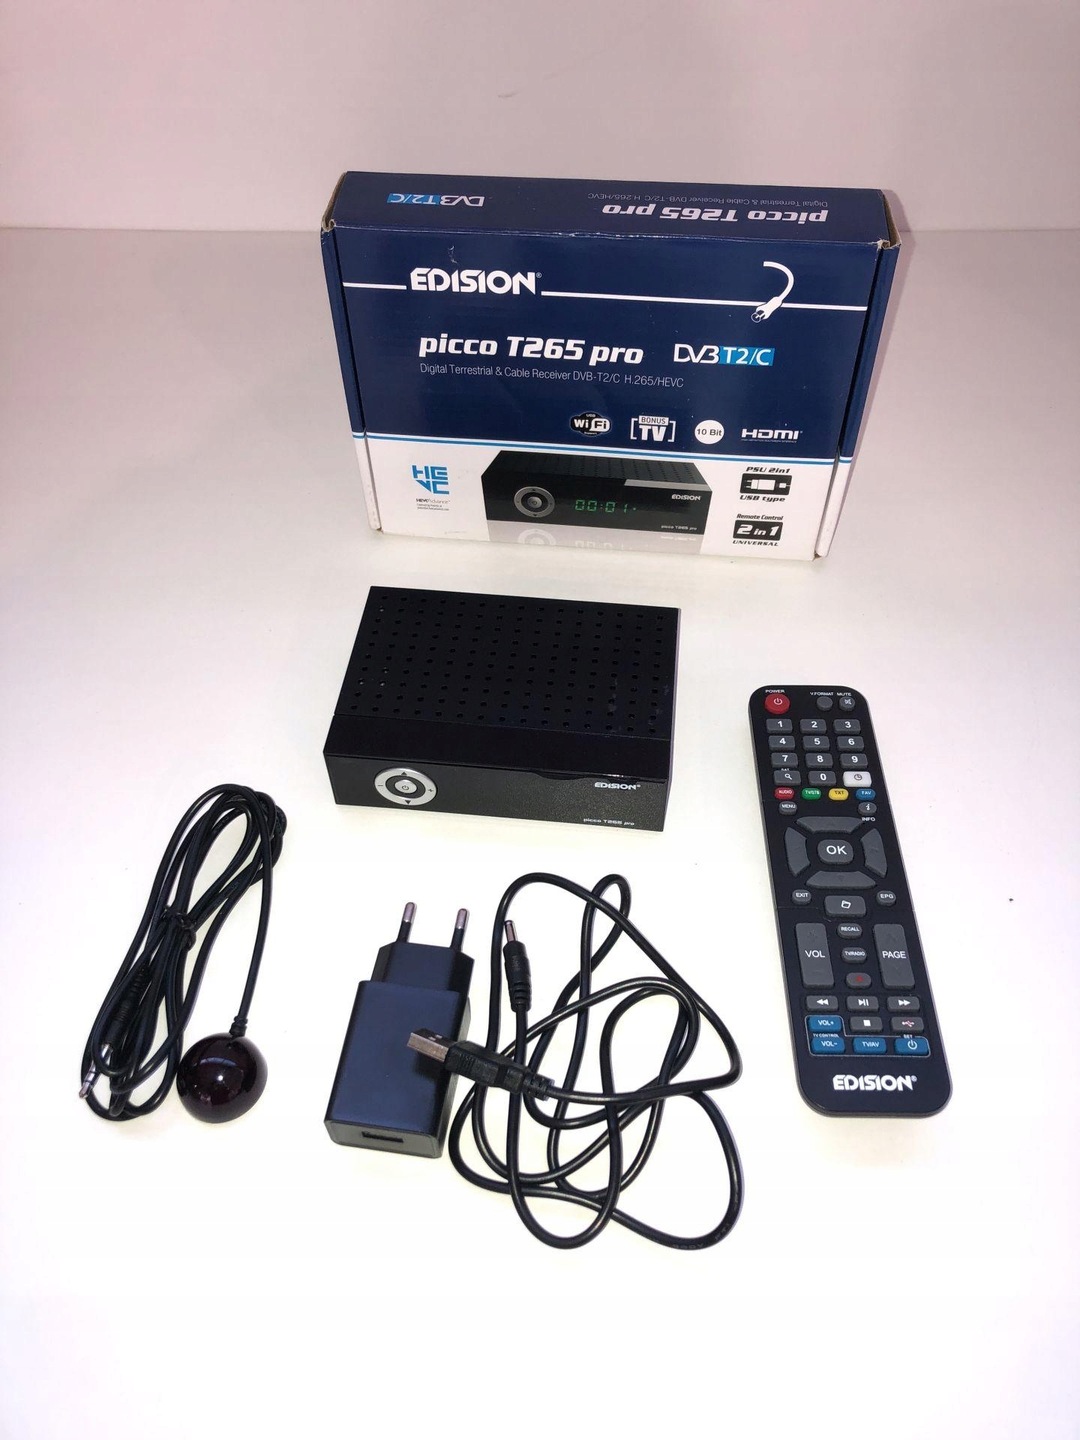 EDISION Picco T265 Pro Digital Terrestrial and Cable Receiver